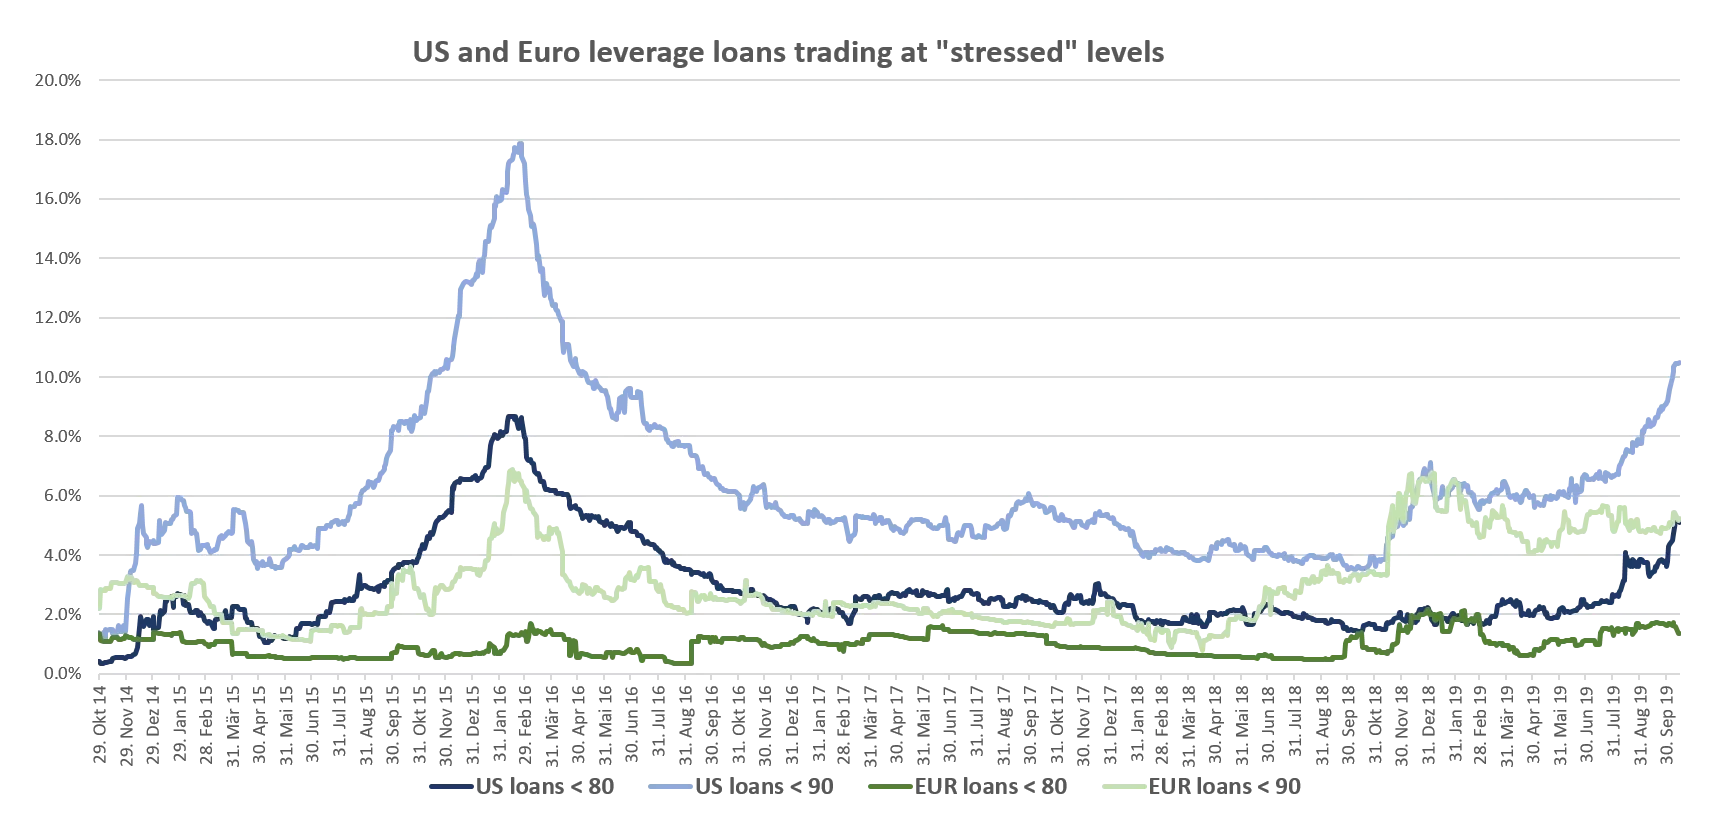 2019-10-30_24_what-does-us-loan-underperformance-mean-for-bondholders_chart